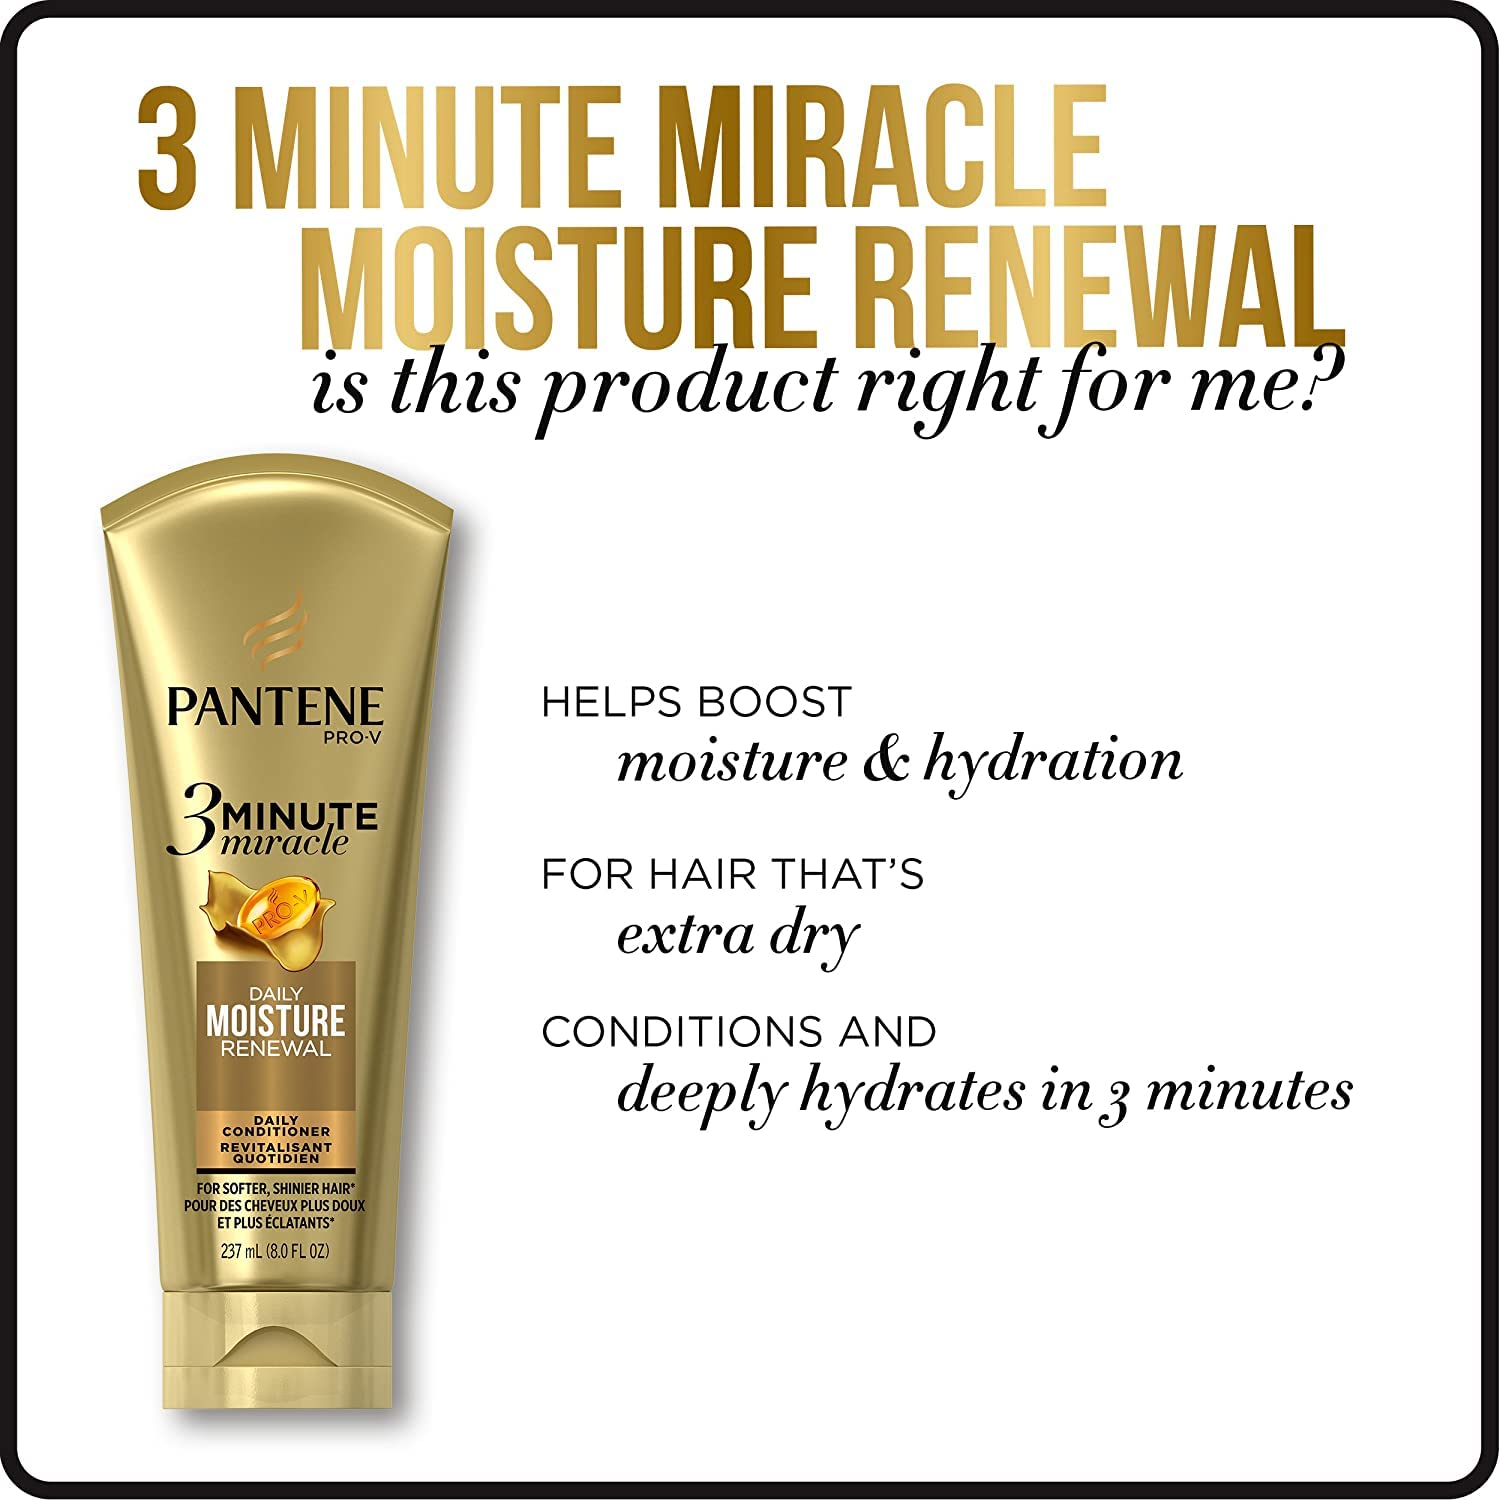 Pantene Moisture Renewal 3 Minute Miracle Deep Conditioner, 6 Fluid Ounce, Pack of 2